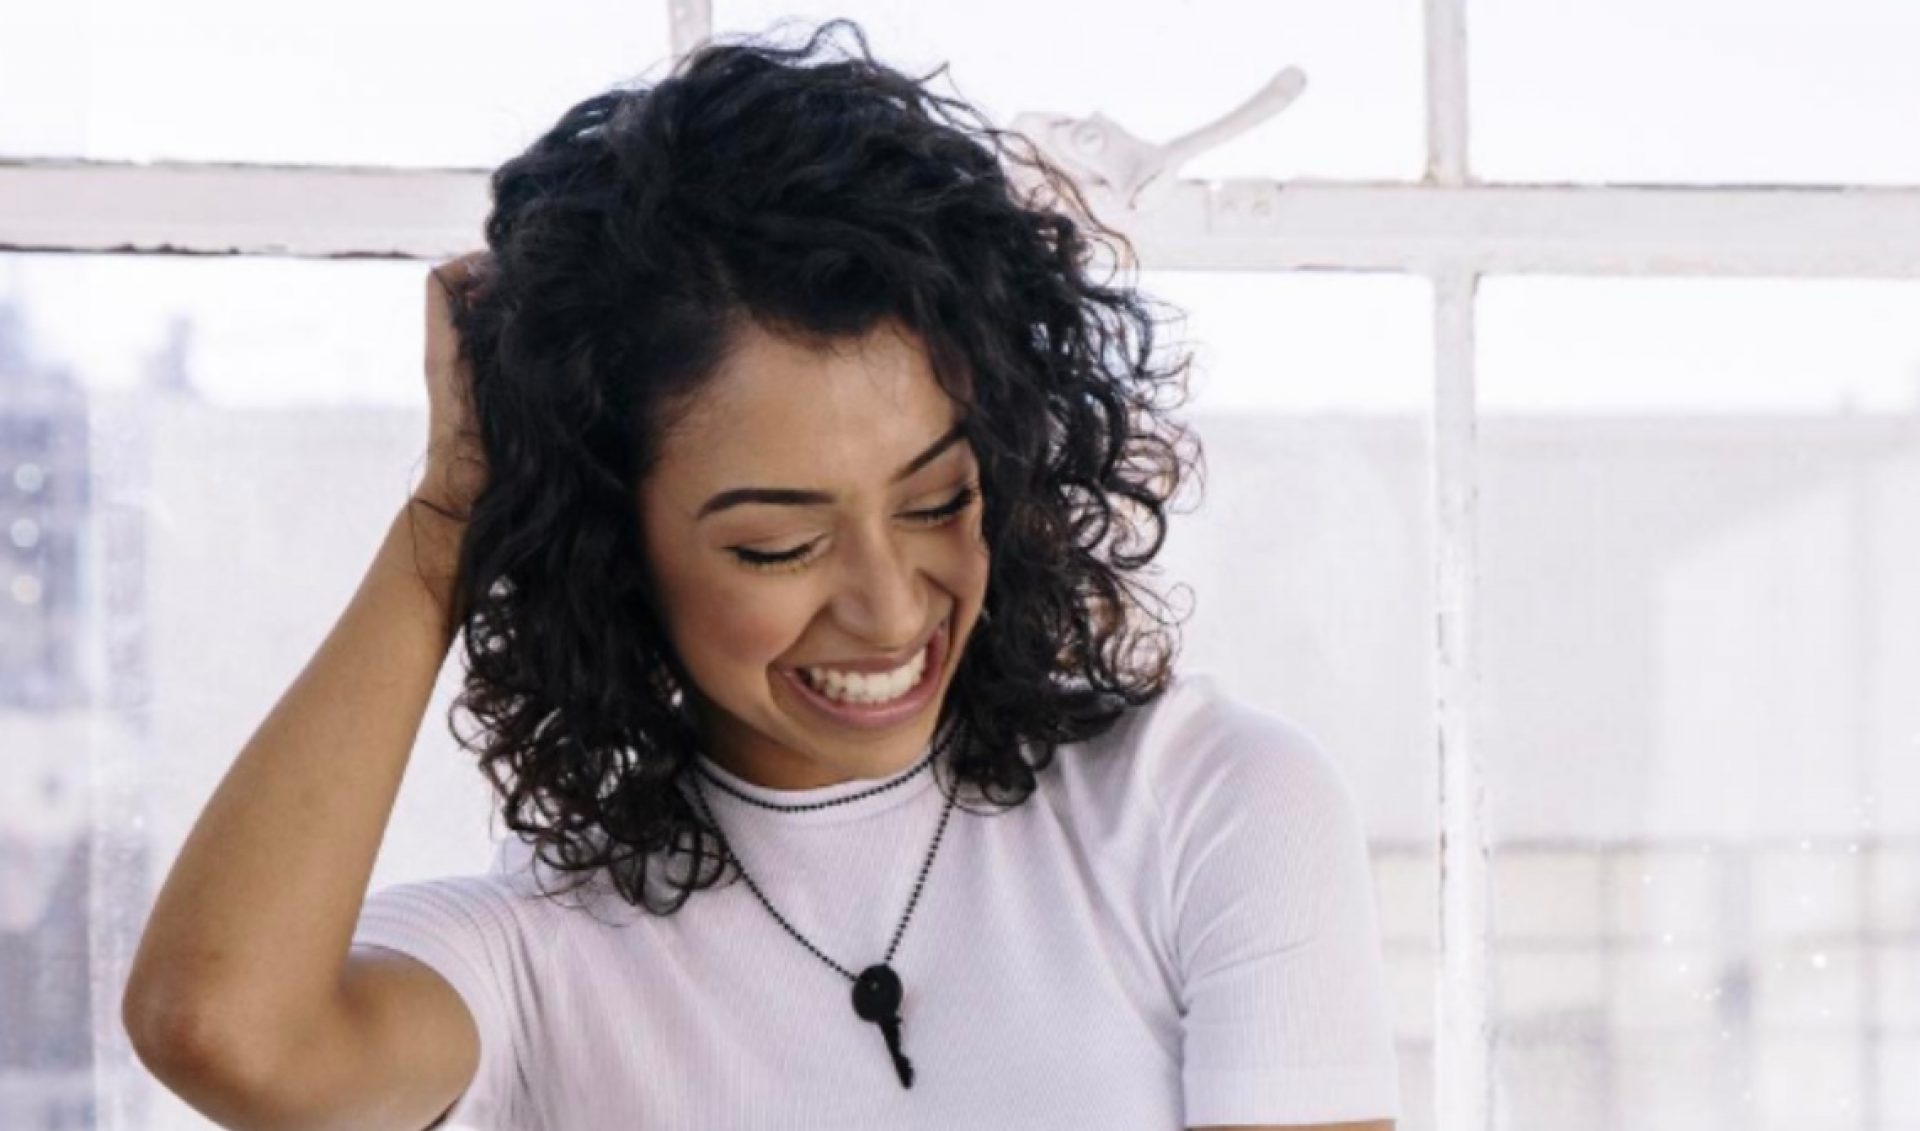 YouTube Star Liza Koshy Launches Line Of Necklaces Through Charitable Jeweler The Giving Keys